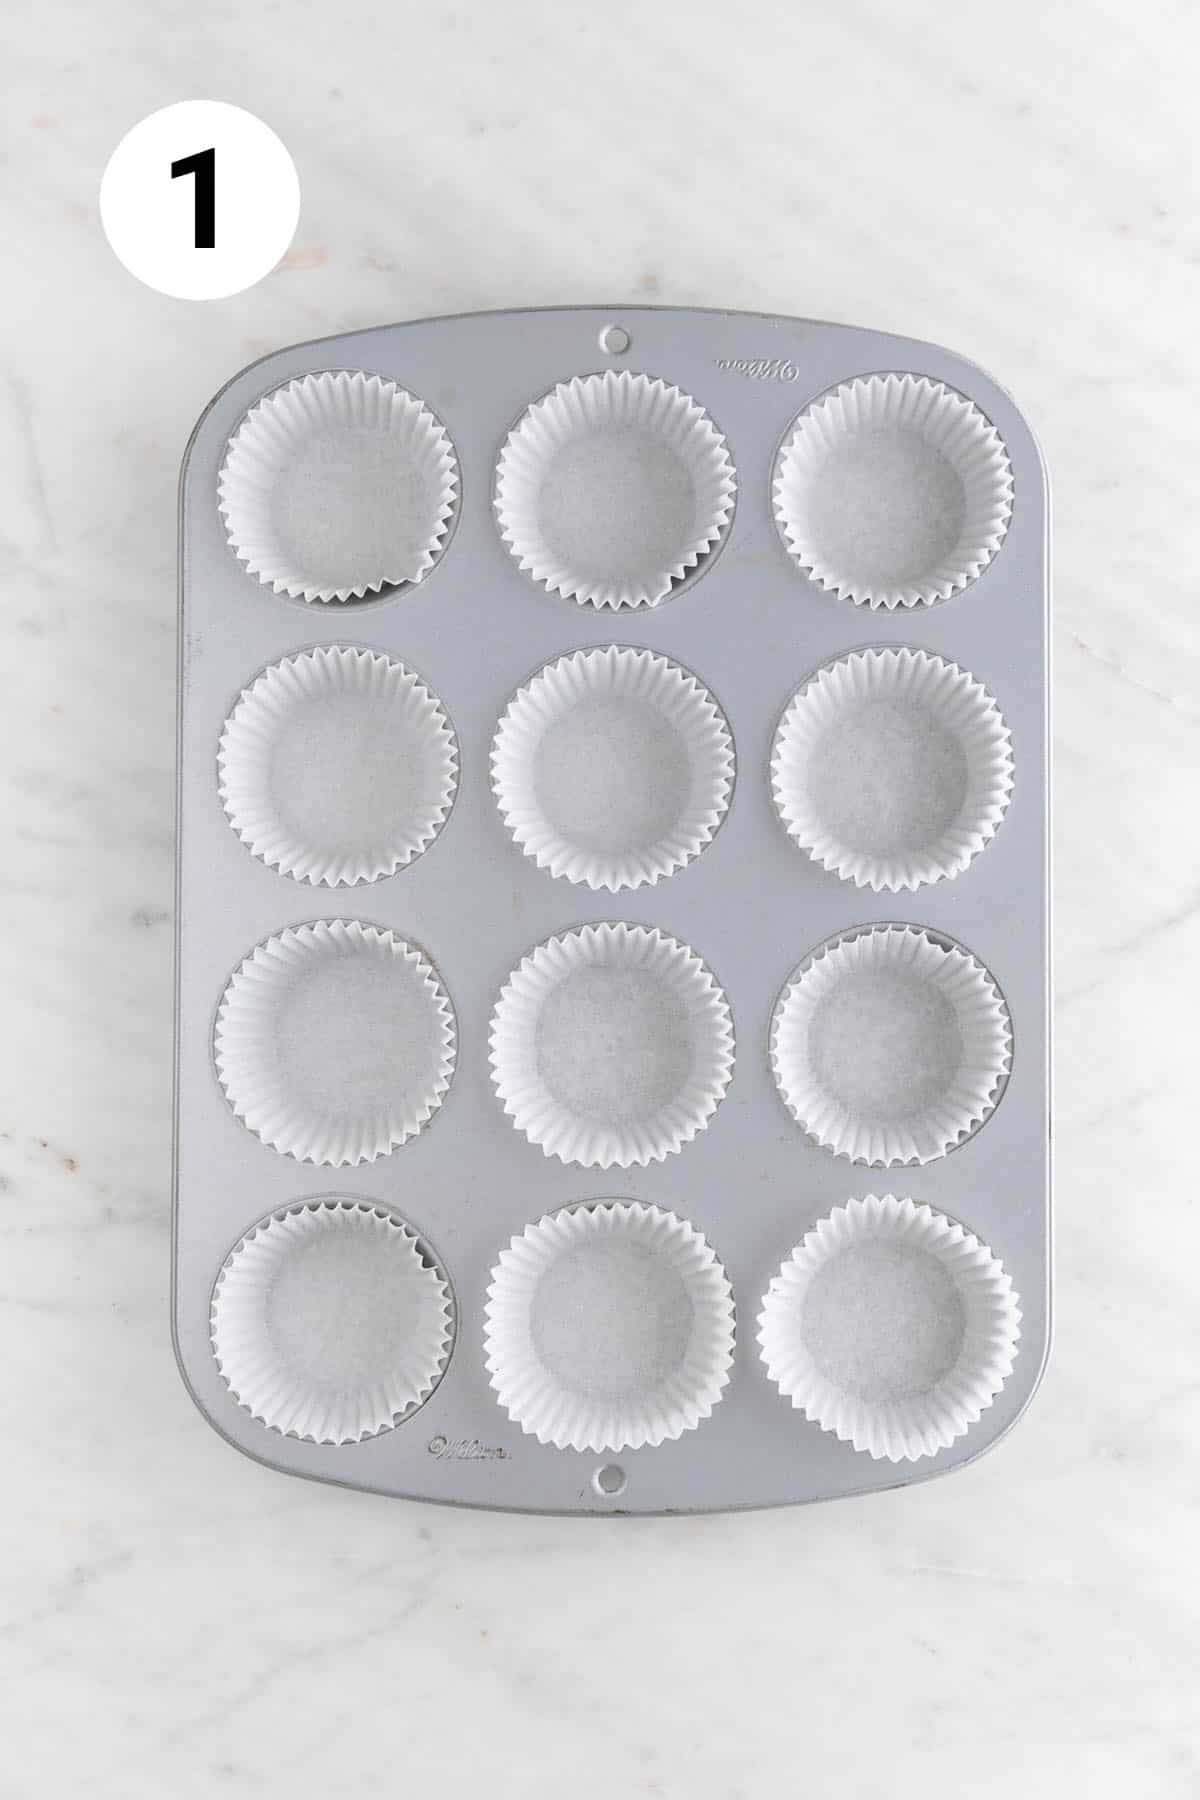 Muffin tin filled with liners.